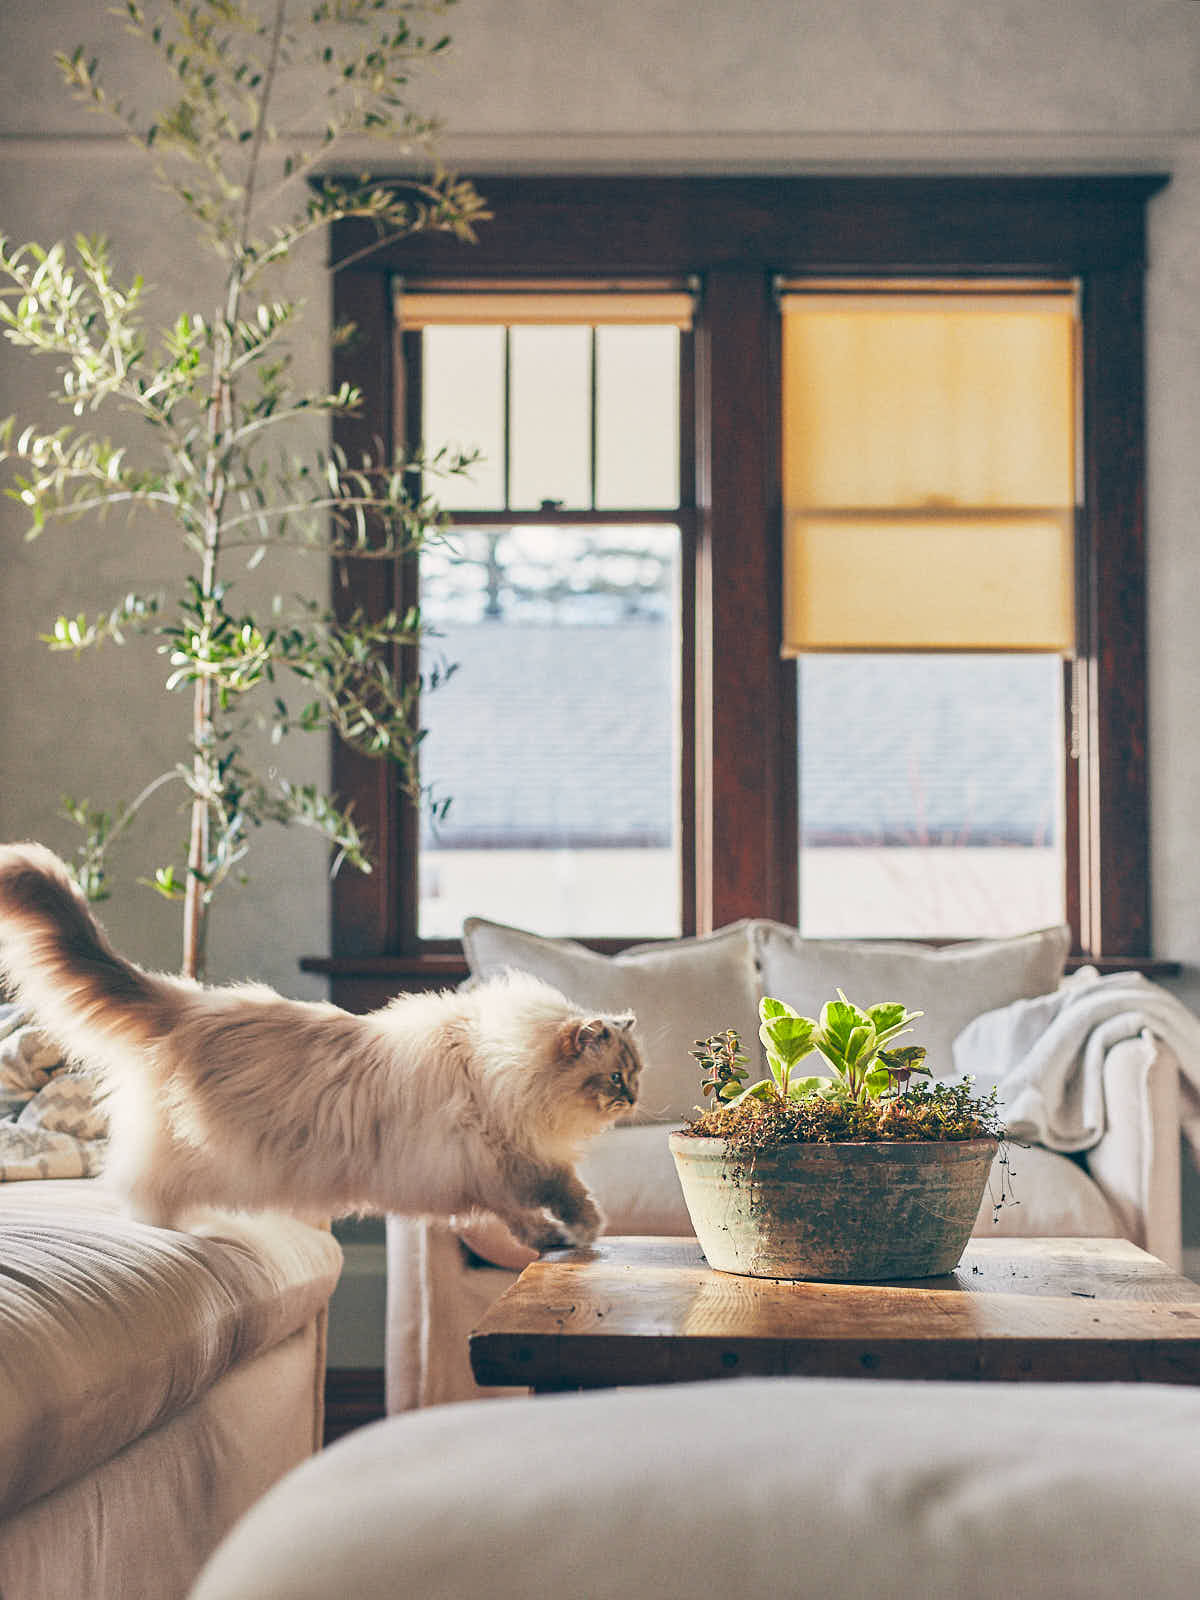 White Ragdoll cat jumping off couch onto coffee table with plant